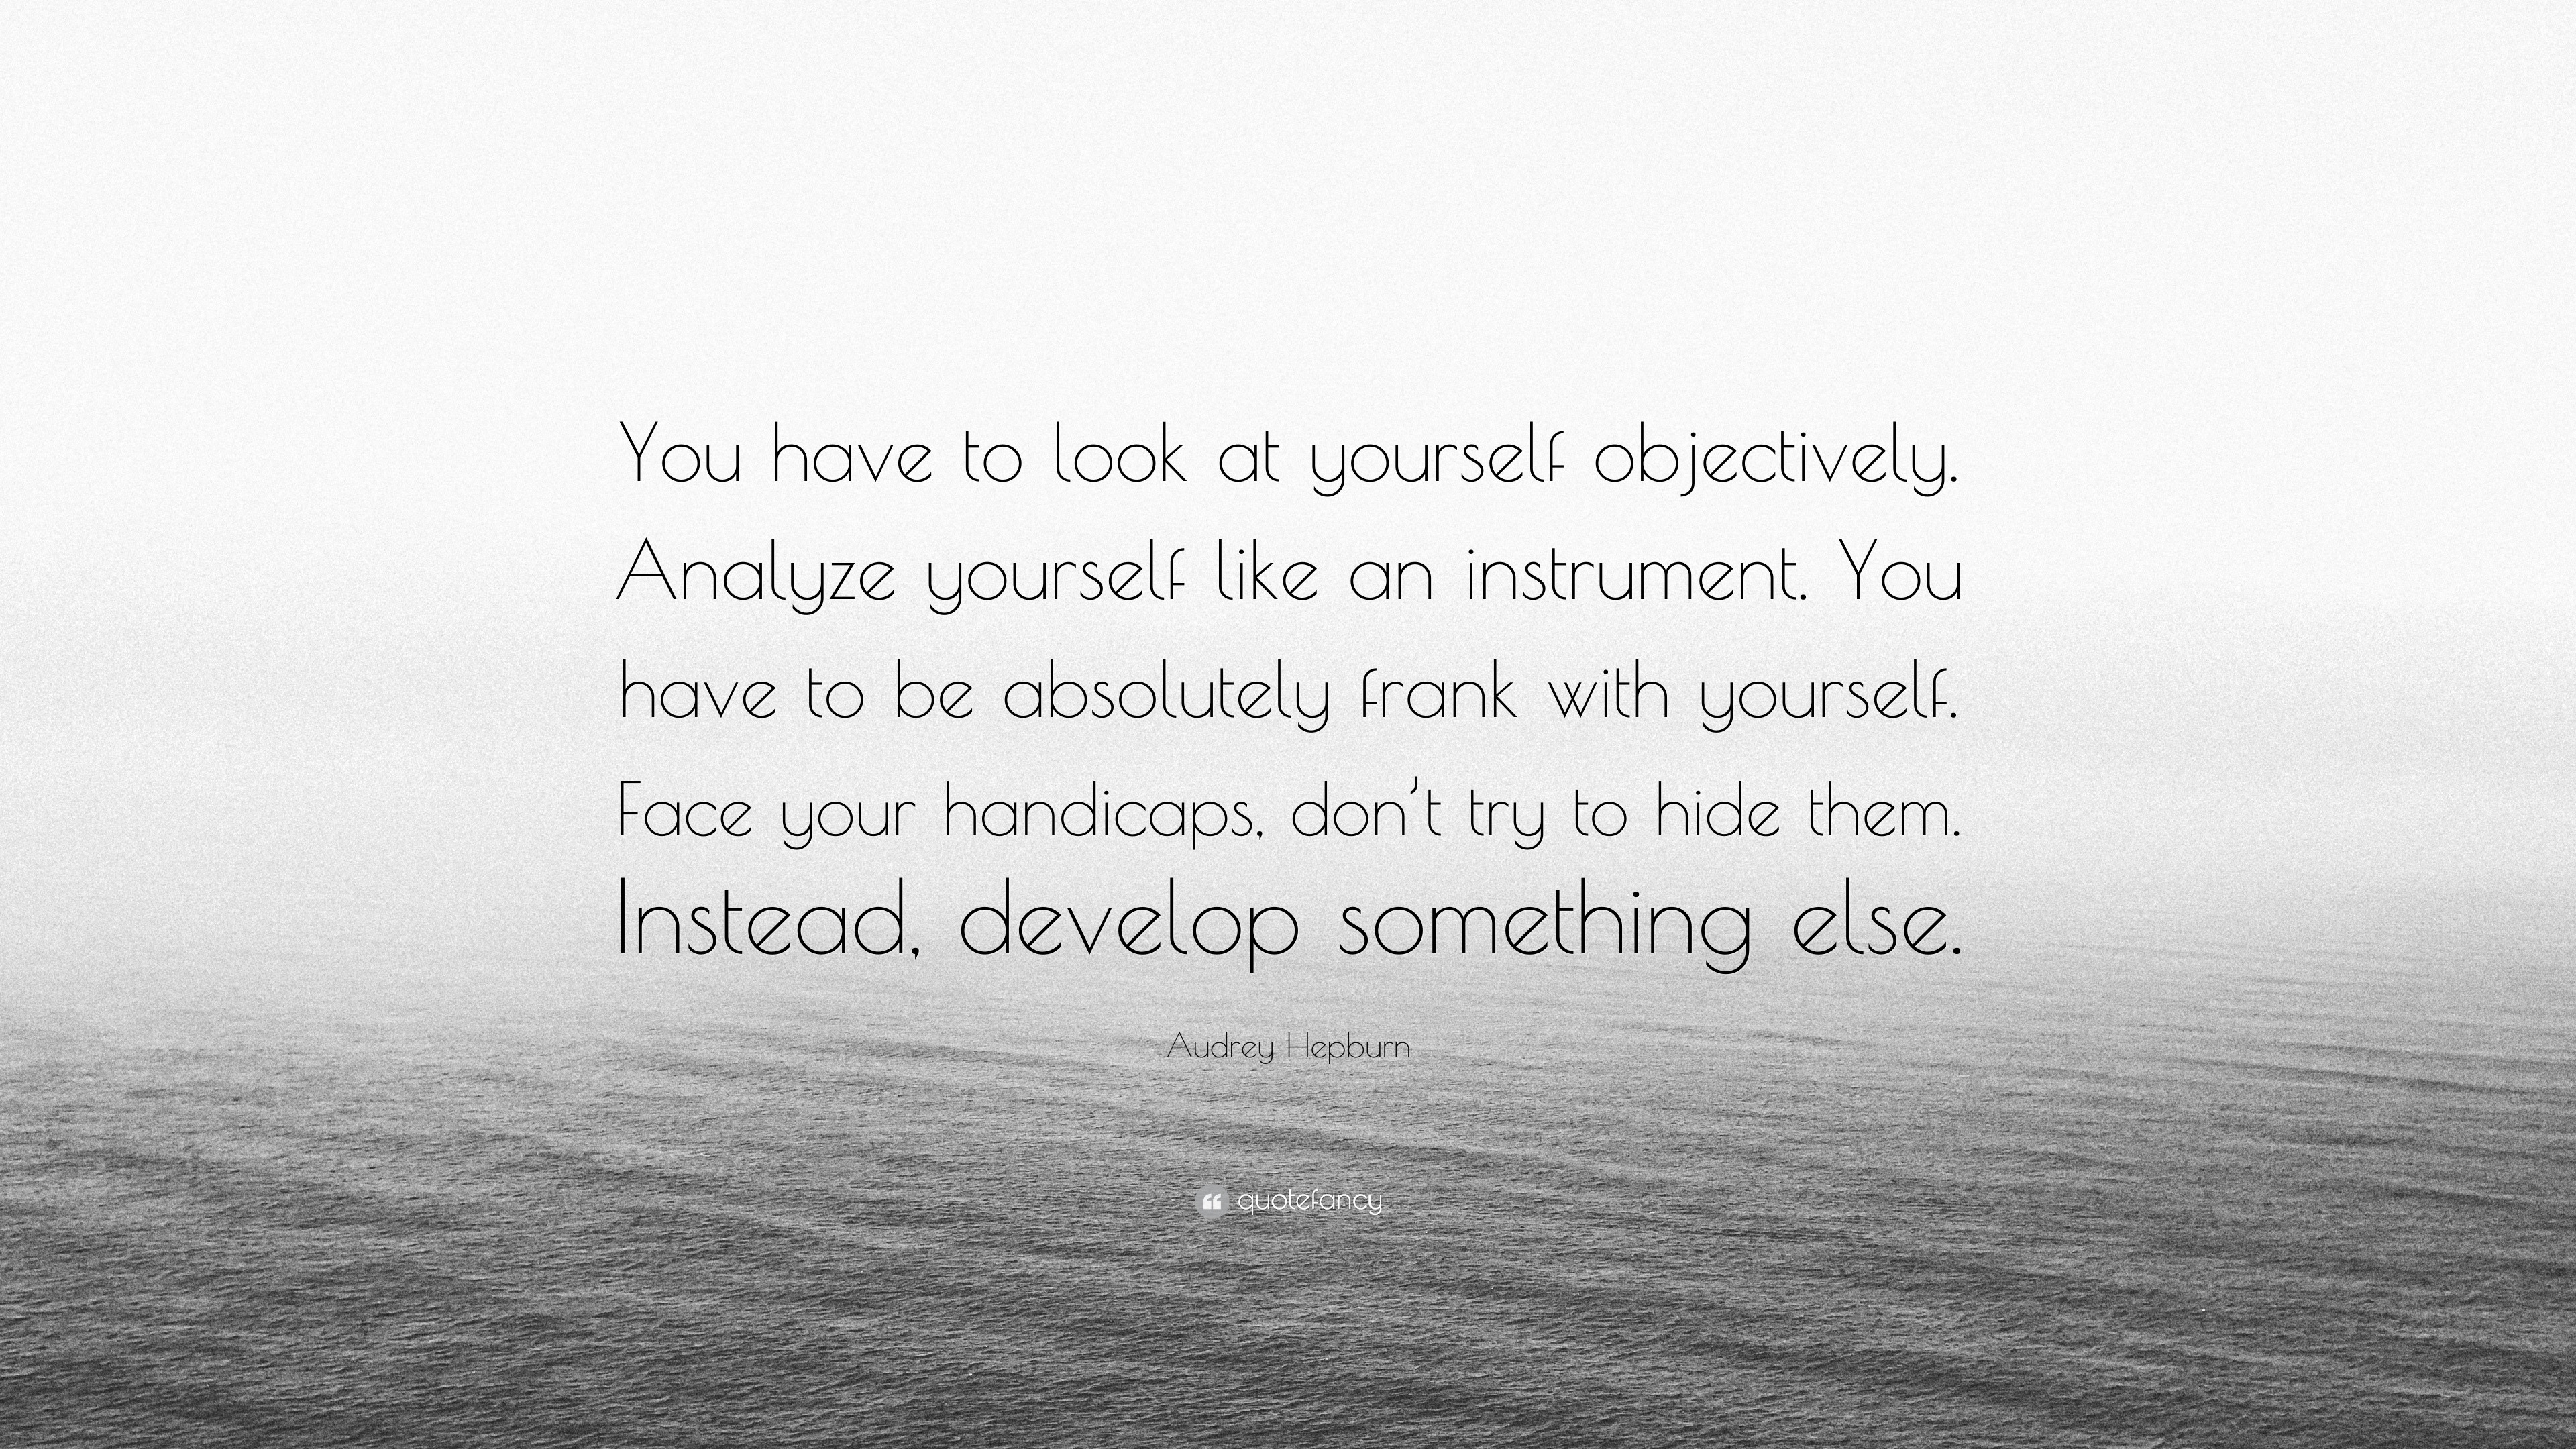 Audrey Hepburn Quote: “You have to look at yourself objectively ...